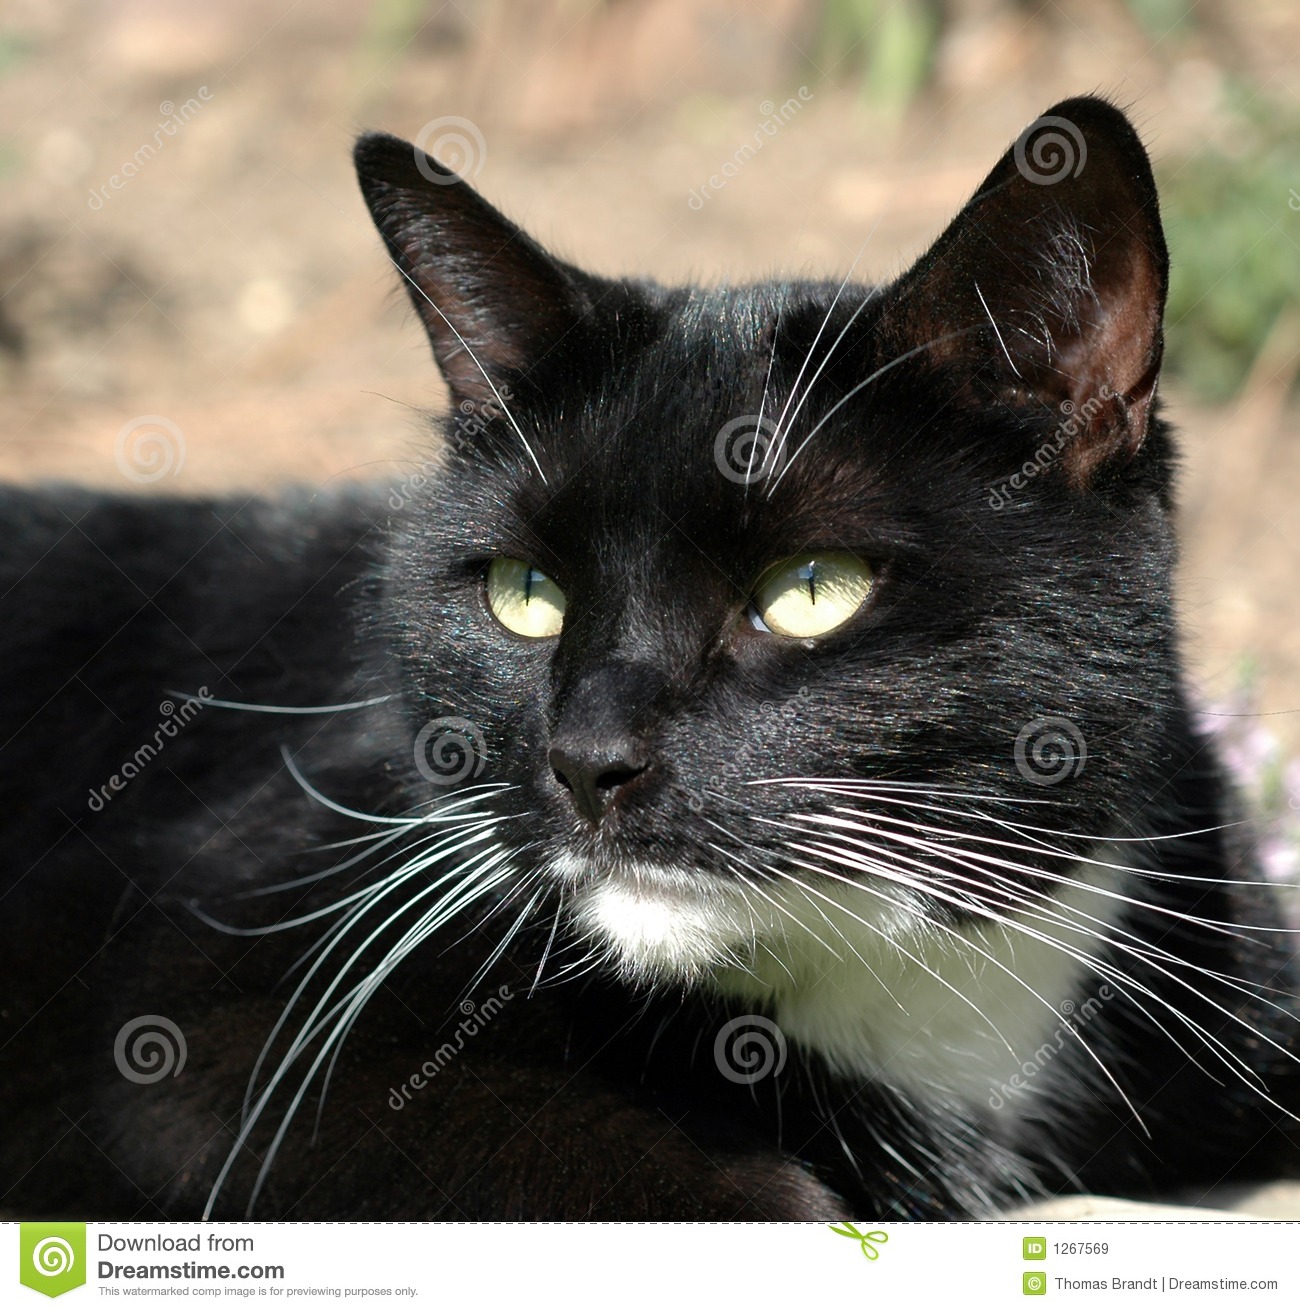 Black Short Haired Cat With White Chin And Chest Looking Alert Left